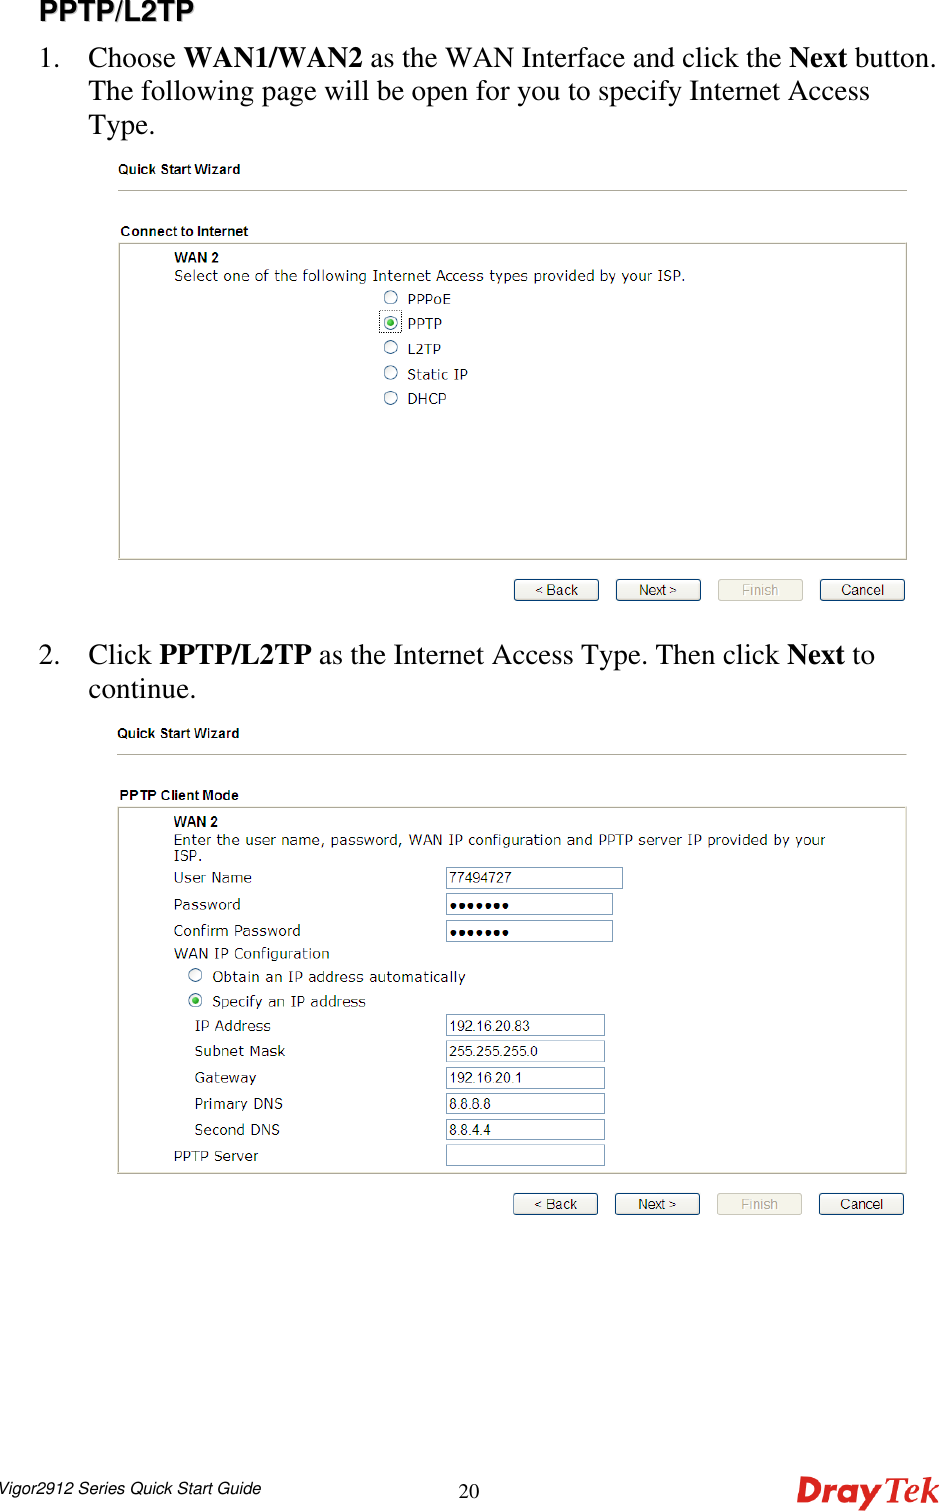  Vigor2912 Series Quick Start Guide 20PPPPTTPP//LL22TTPP  1. Choose WAN1/WAN2 as the WAN Interface and click the Next button. The following page will be open for you to specify Internet Access Type.  2. Click PPTP/L2TP as the Internet Access Type. Then click Next to continue.  